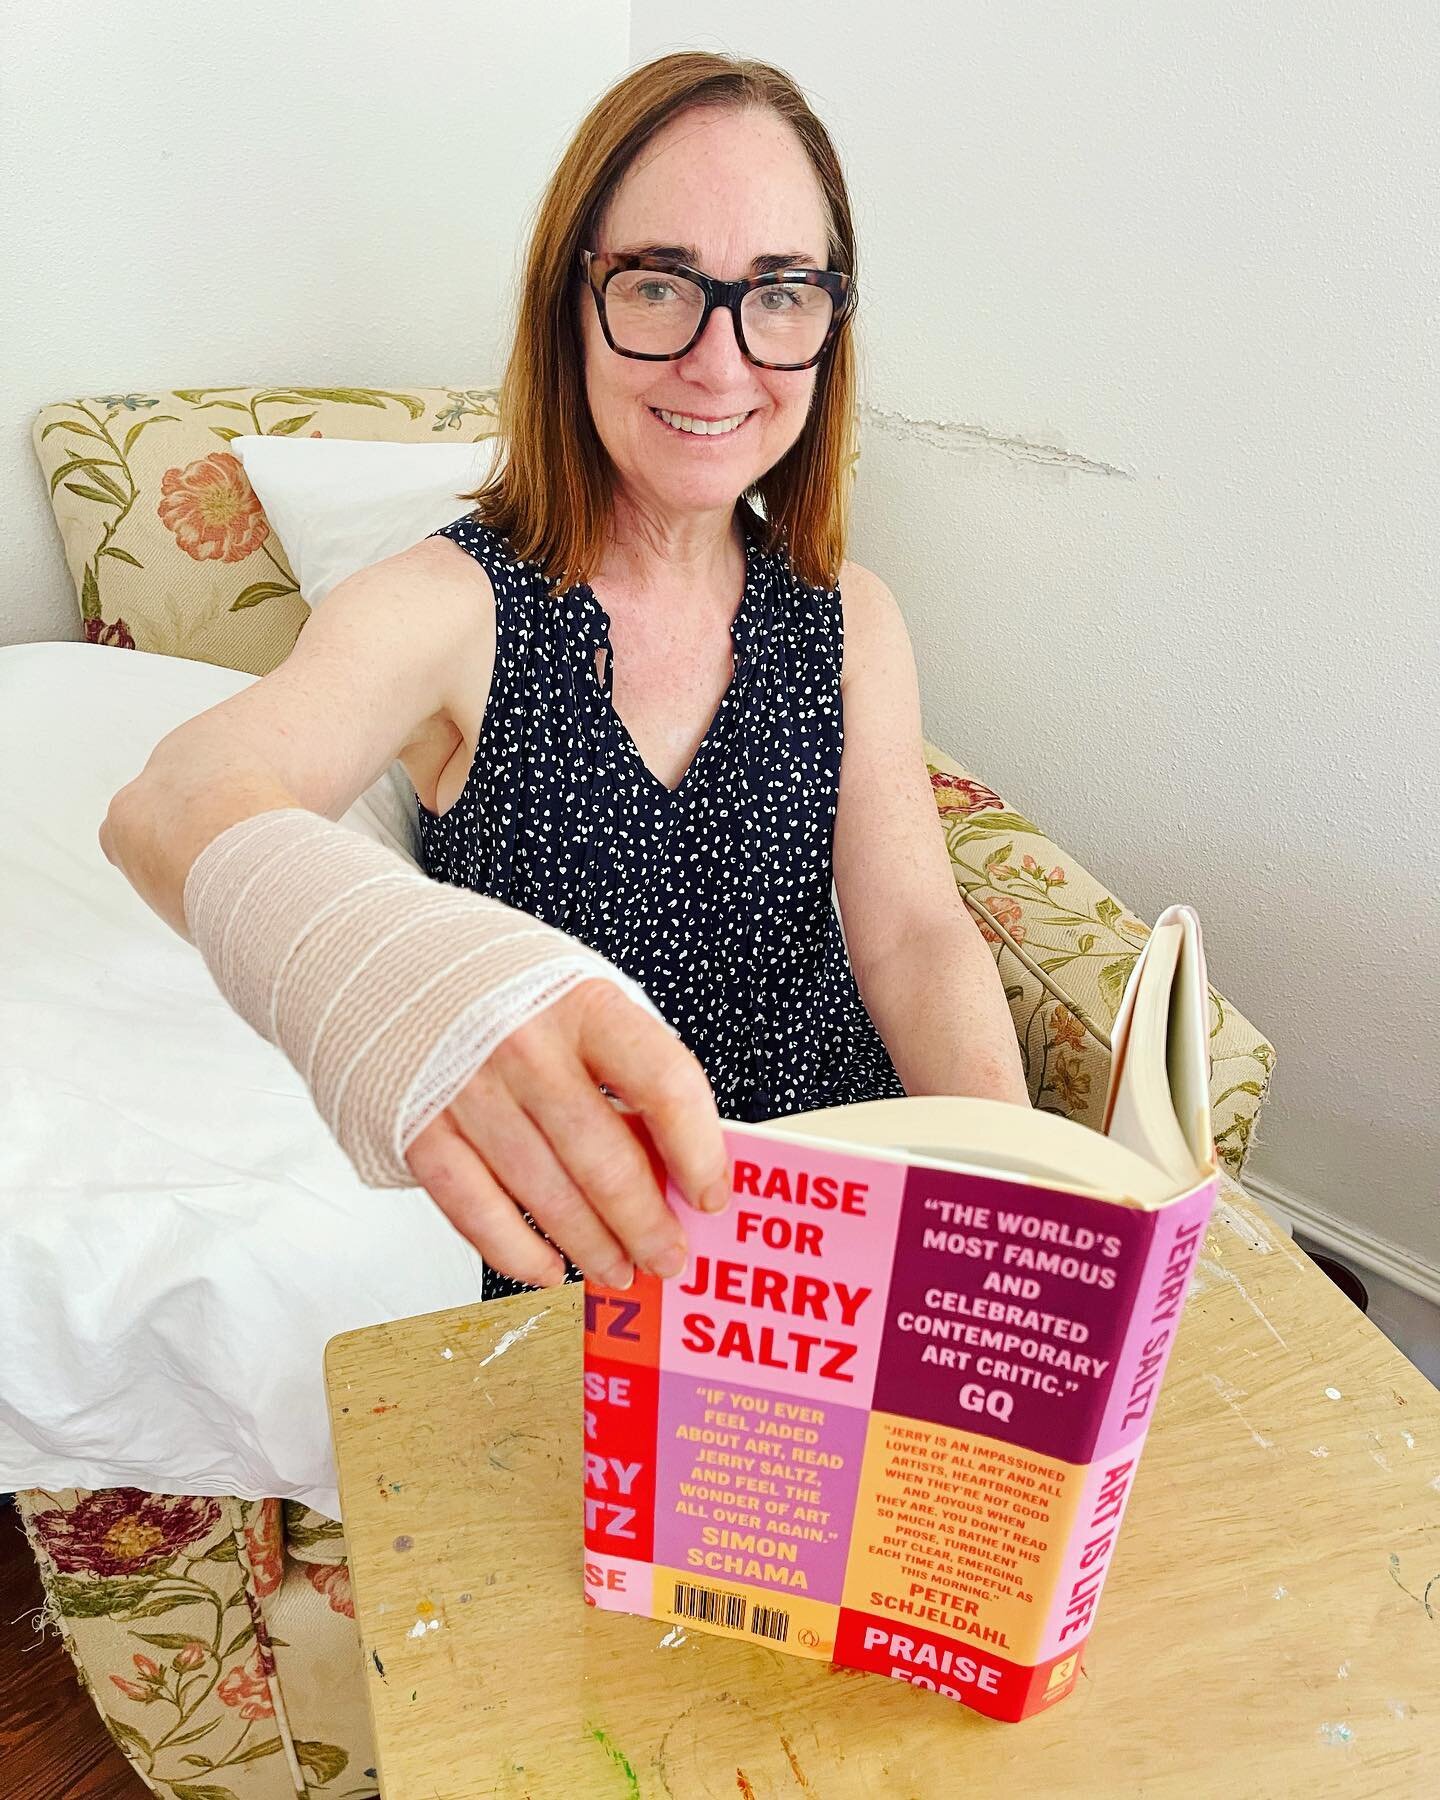 Reading &ldquo;Art is Life&rdquo; by Jerry Saltz as I recover from wrist surgery number two. 

Yesterday, I had carpal tunnel release surgery and removal of my plate/pins from broken wrist surgery number one in December. 

I&rsquo;m feeling hopeful! 